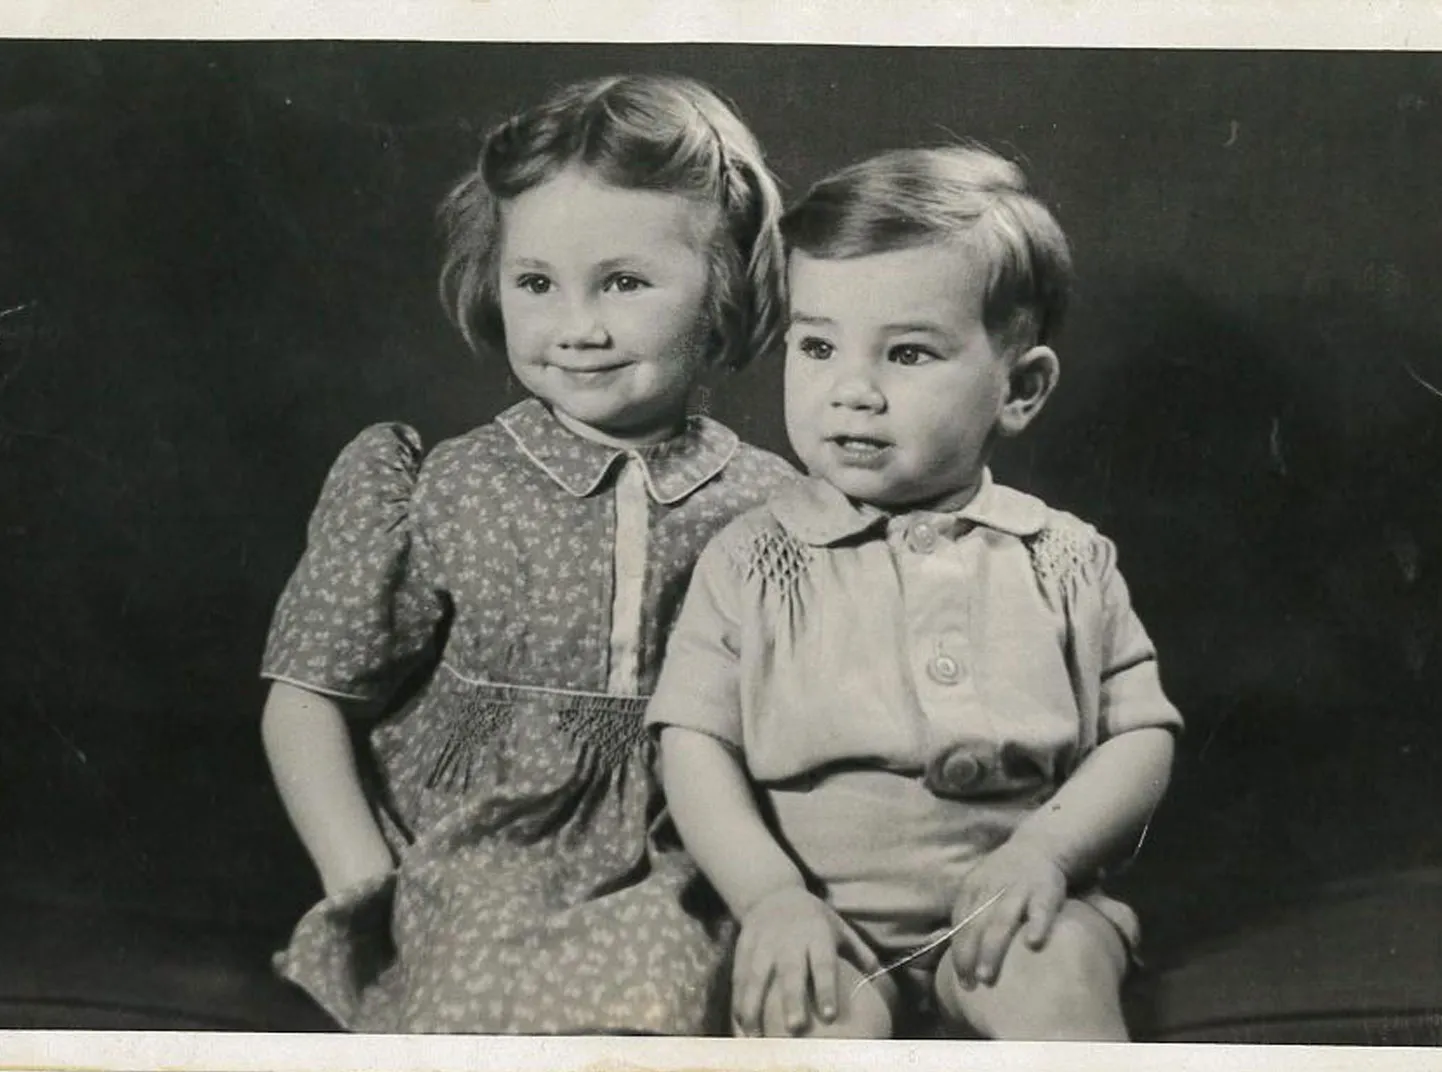 A black and white image of a young boy and girl.